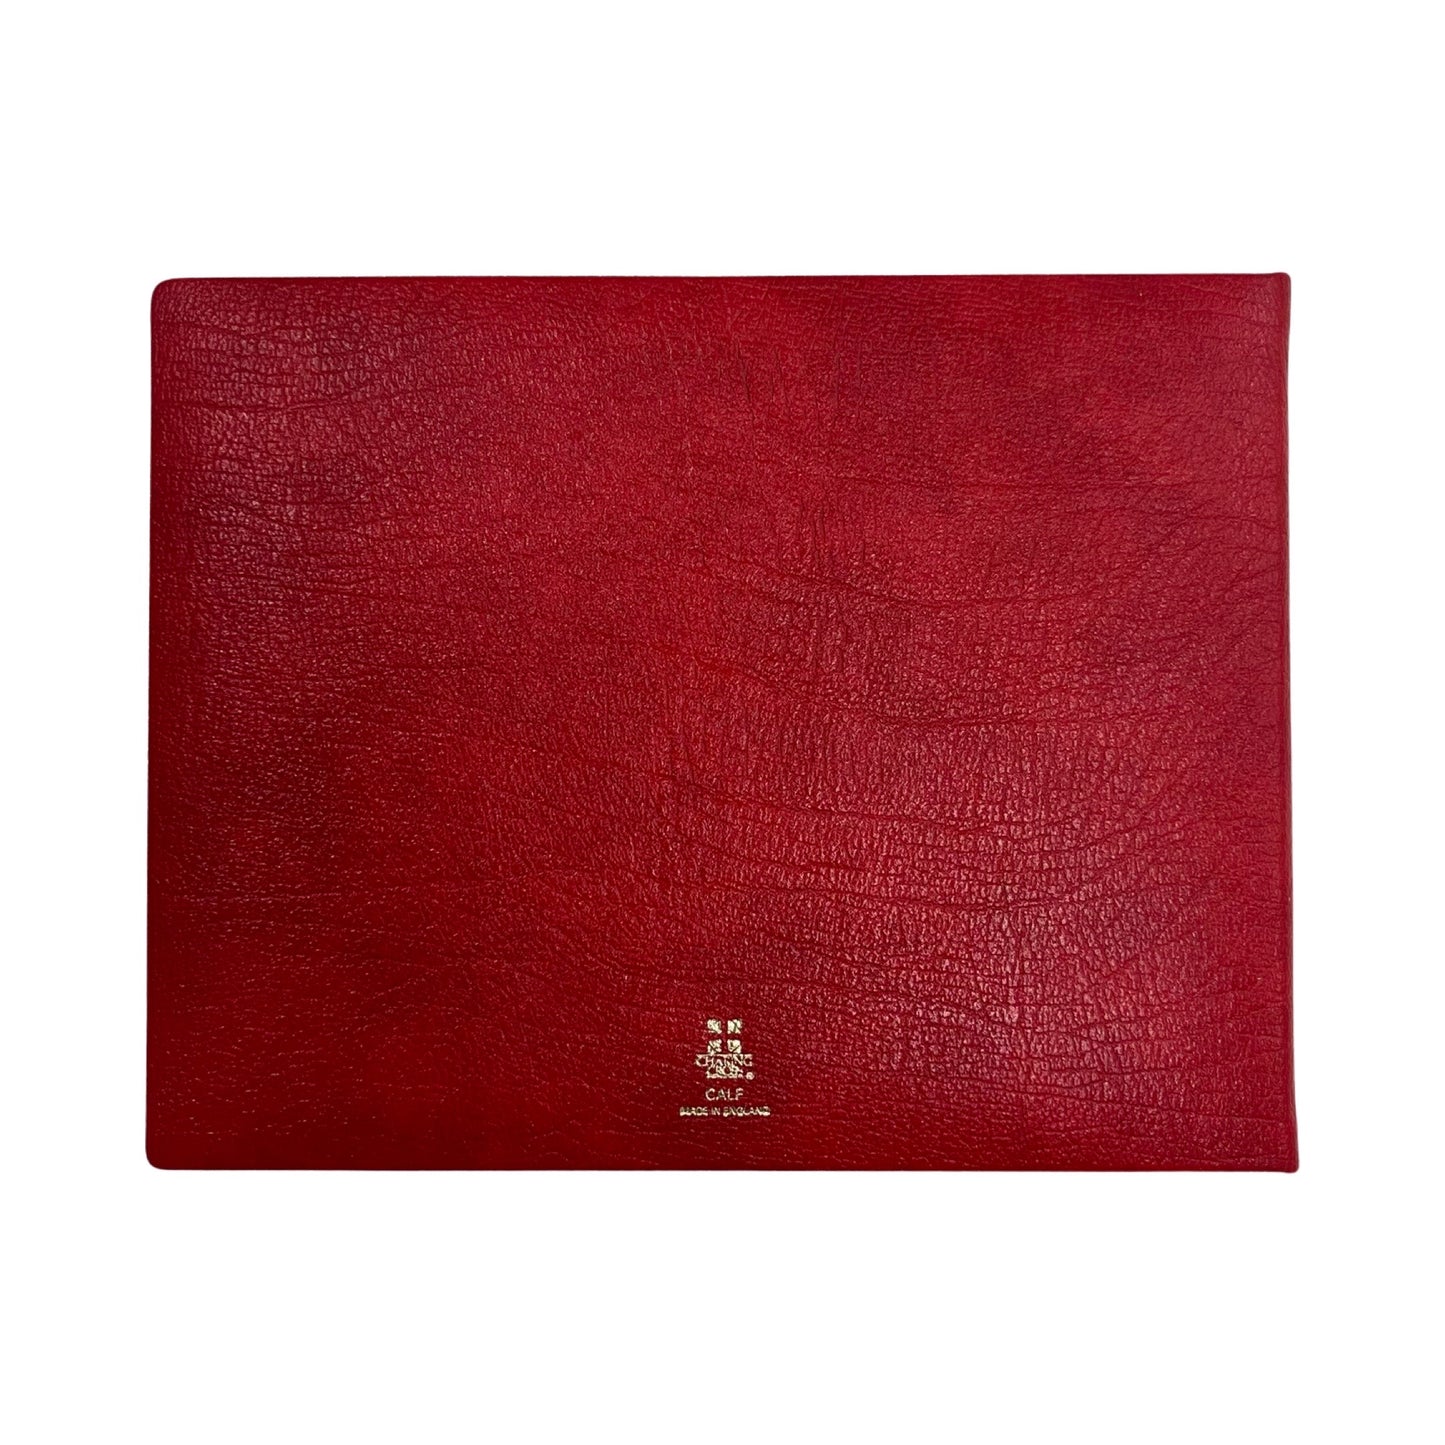 White House Fellows | Bespoke Guest Book | 2023-2024 White House Fellows Speakers Book | Embossed Scarlet Leather | 7 by 9 Inches | Blank Pages | GR79CAB